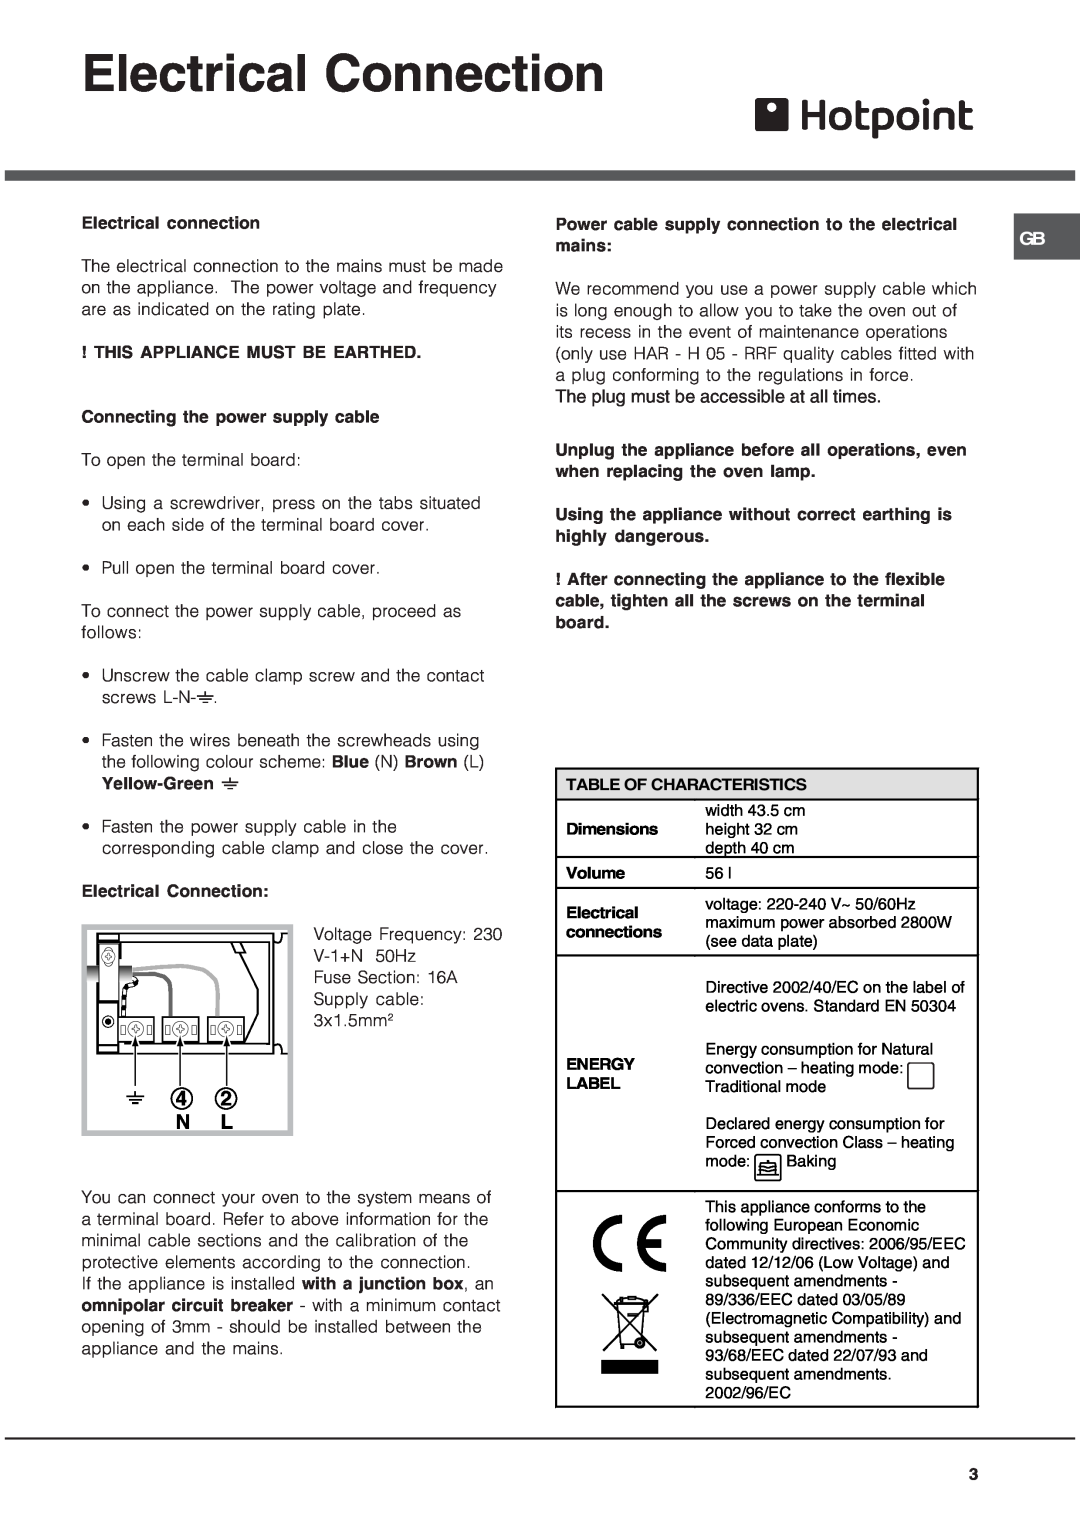 Hotpoint AHP69PGX manual Electrical Connection, 4 2 N L, The plug must be accessible at all times 